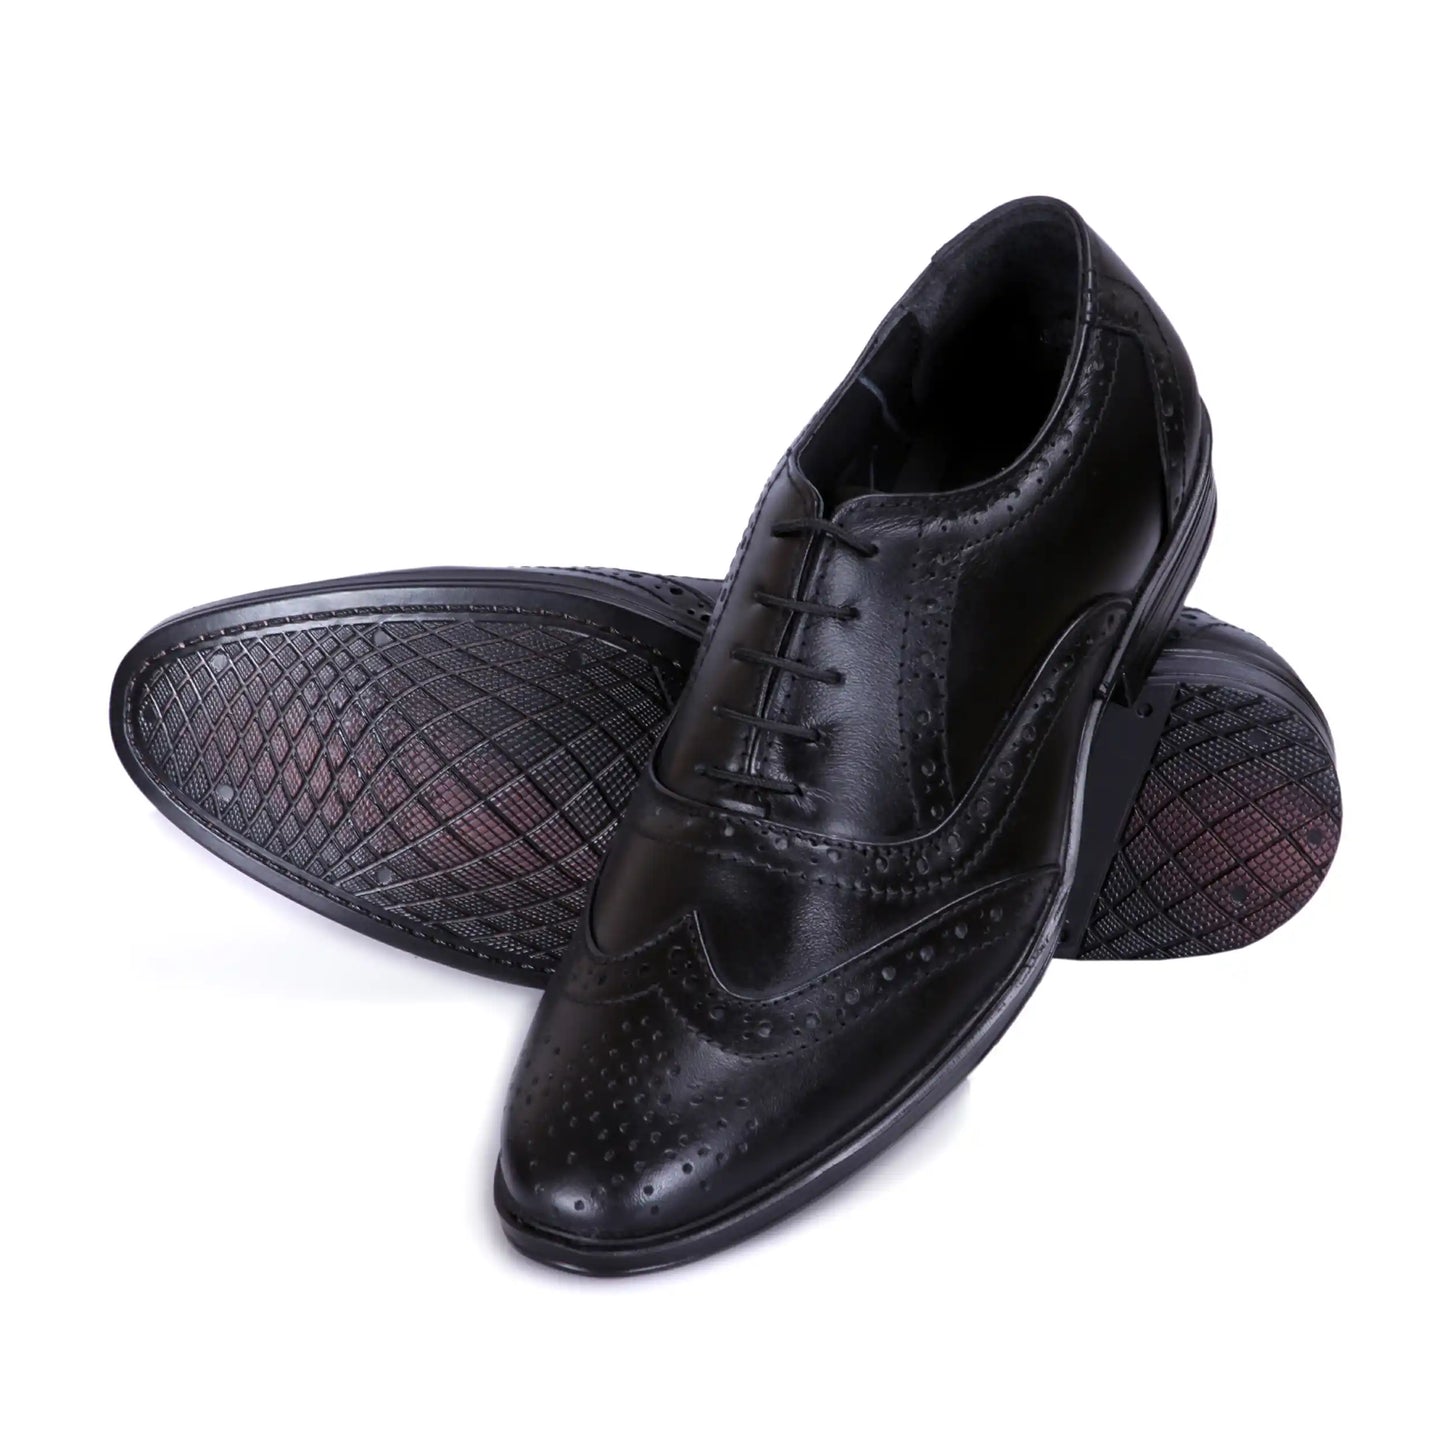 Genuine Leather Formal Brogue Shoes for Men